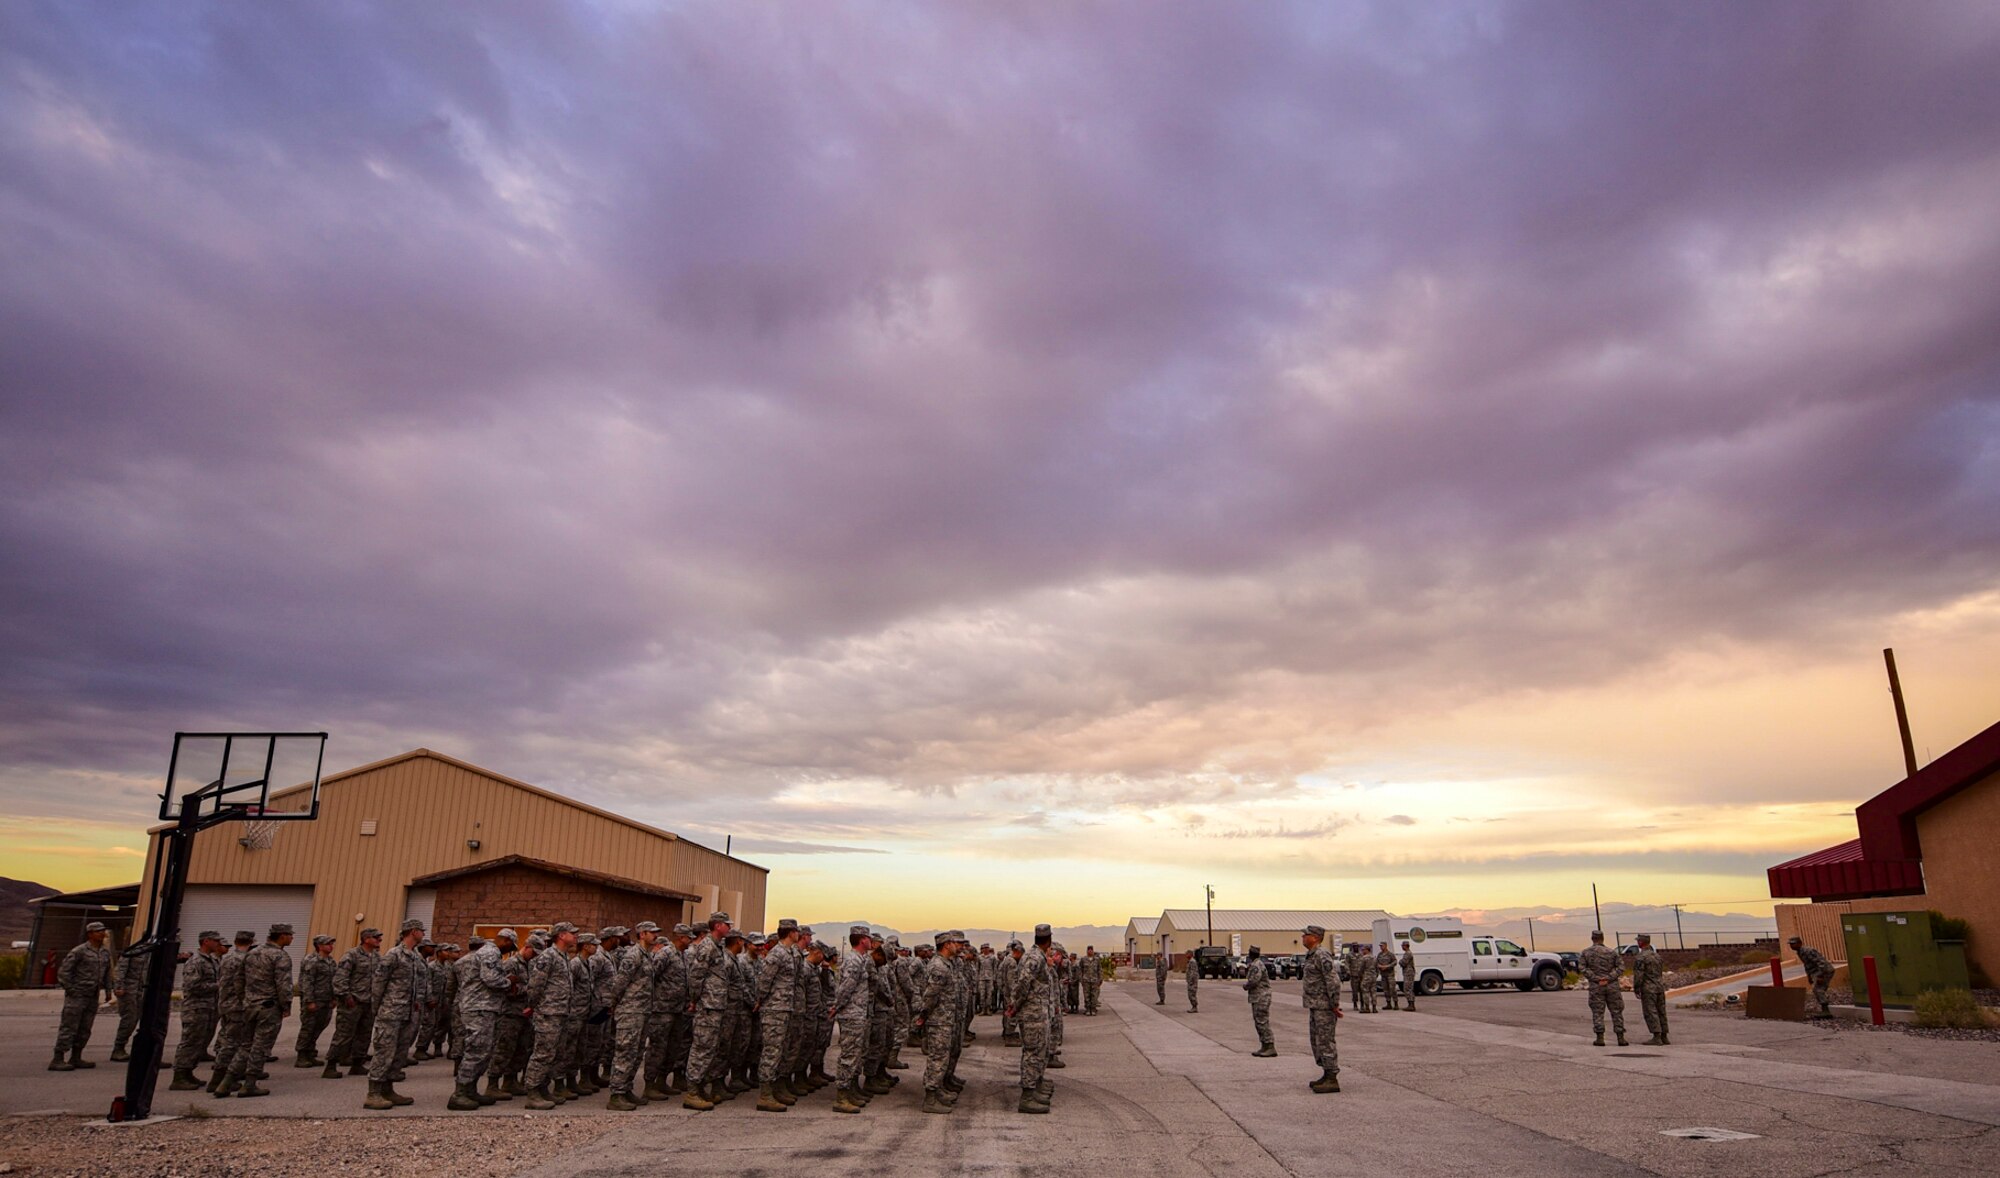 Airmen from the 99th Civil Engineer Squadron fall into formation to kick off their monthly base emergency engineer force training exercise at Nellis Air Force Base, Nevada, Oct. 19, 2017. The training consisted of bare base setup and airfield management. (U.S. Air Force photo by Airman 1st Class Andrew D. Sarver/Released)